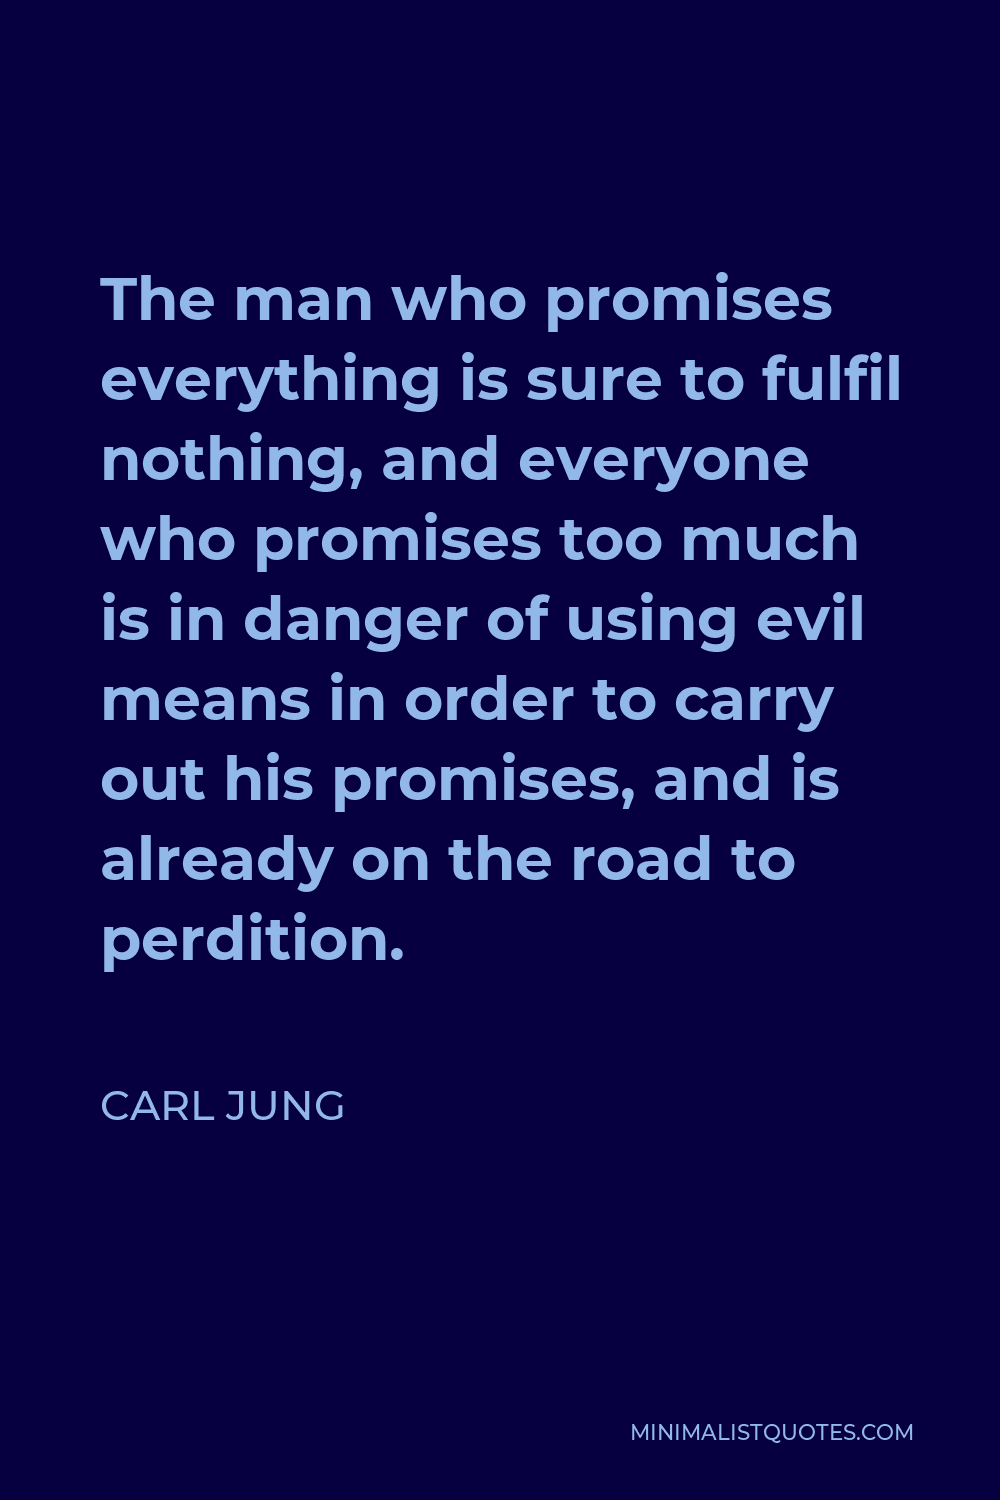 Carl Jung Quote - The man who promises everything is sure to fulfil nothing, and everyone who promises too much is in danger of using evil means in order to carry out his promises, and is already on the road to perdition.